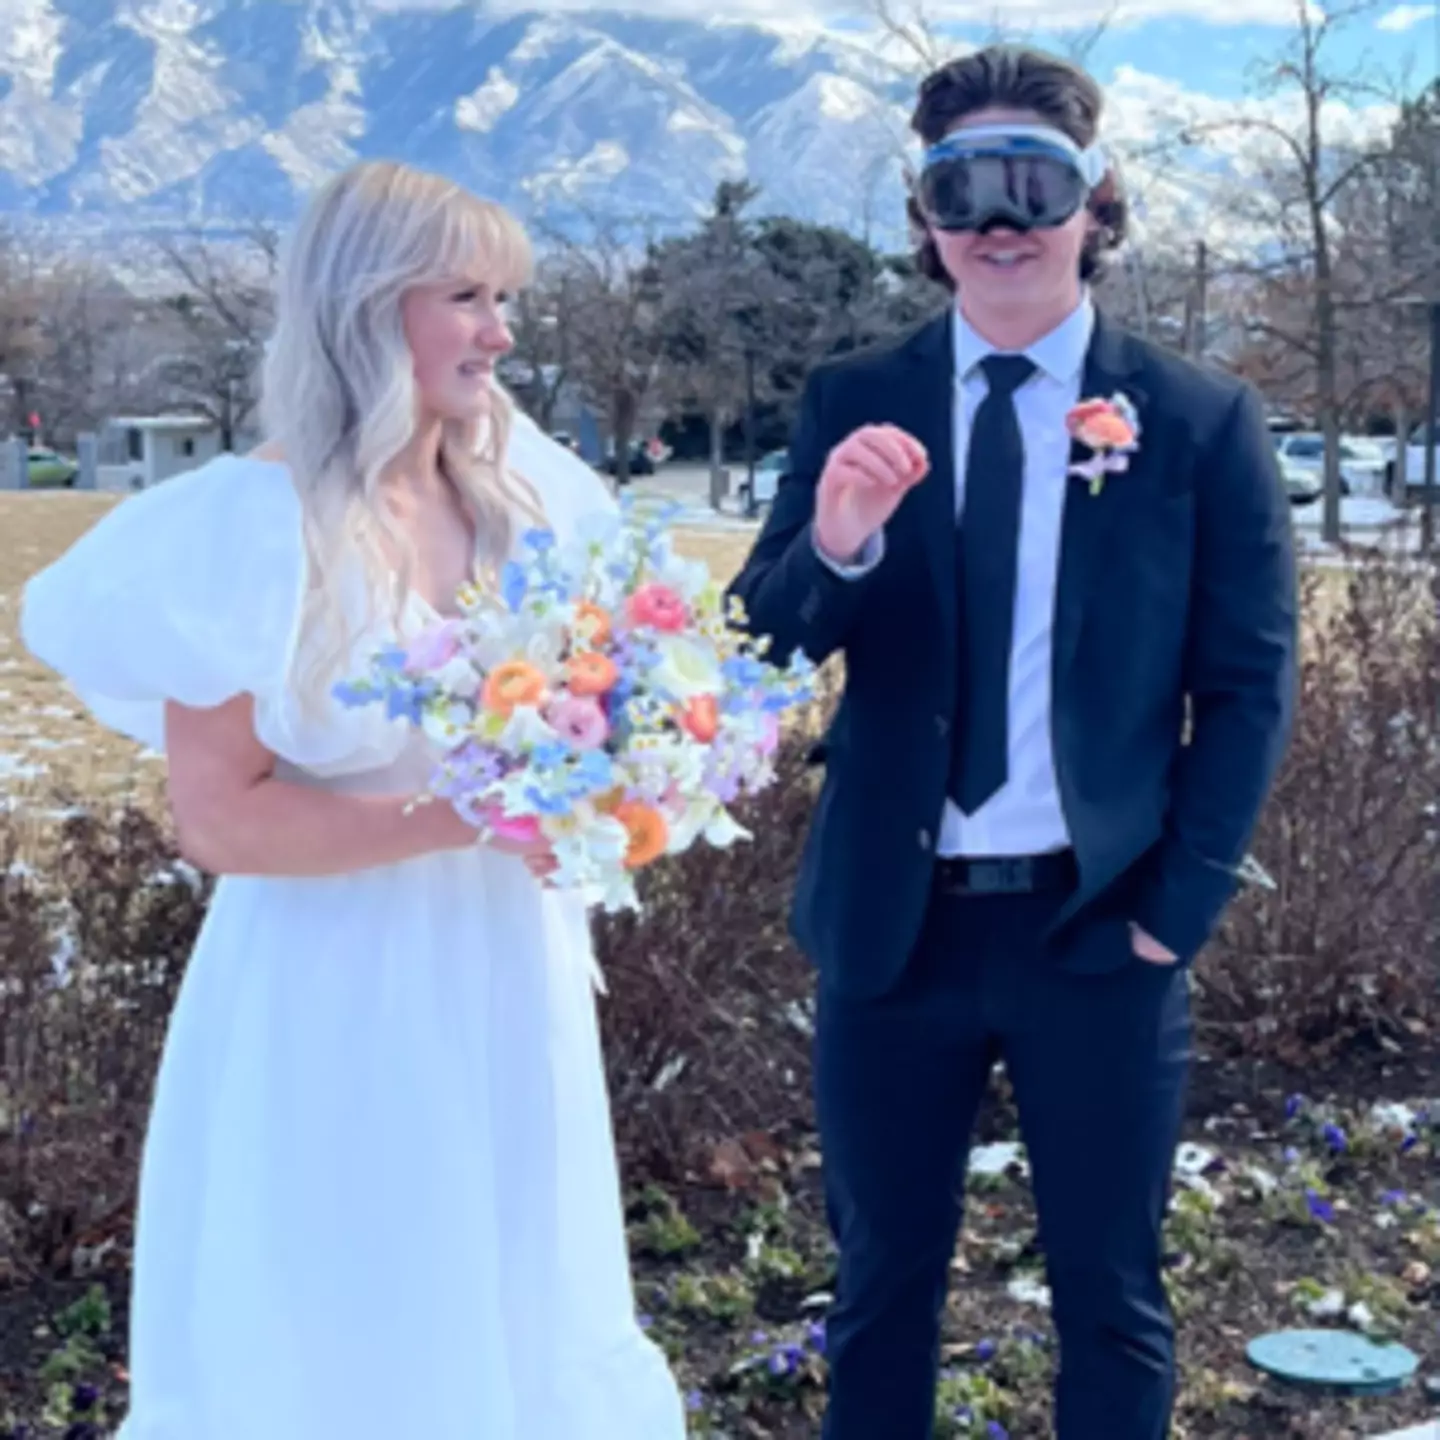 Software engineer wears Apple Vision Pro during his wedding and his wife doesn’t look impressed